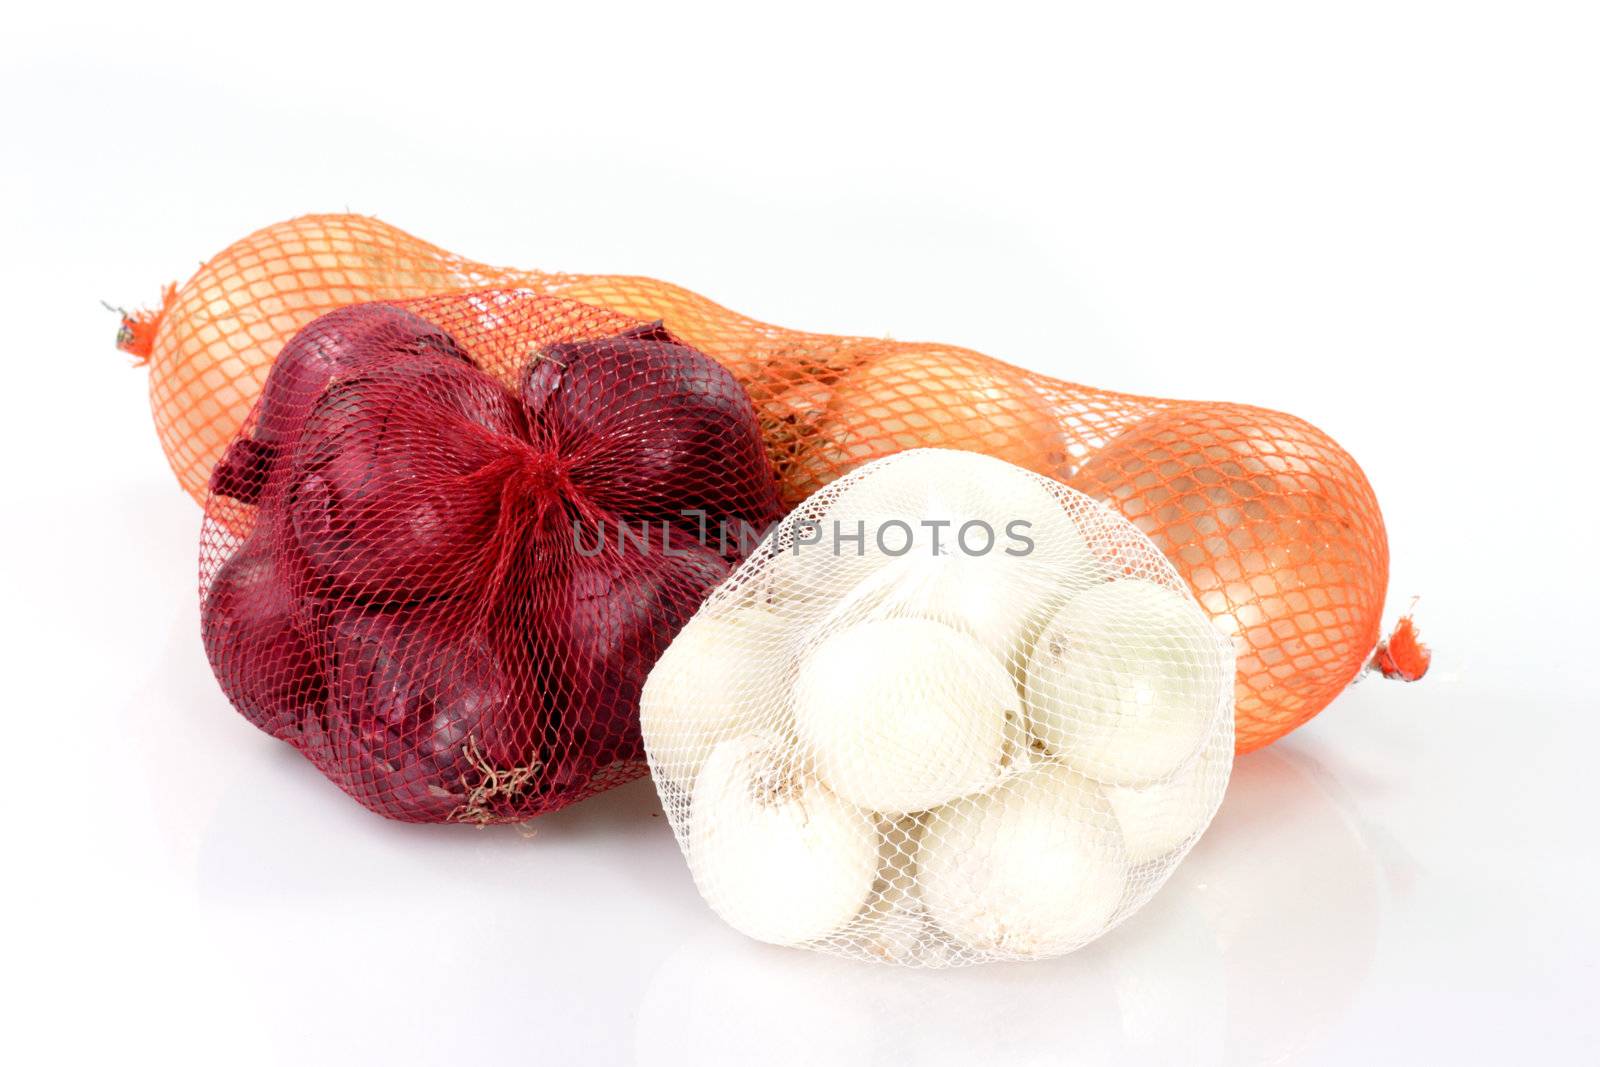 Meshes of onions by Teamarbeit